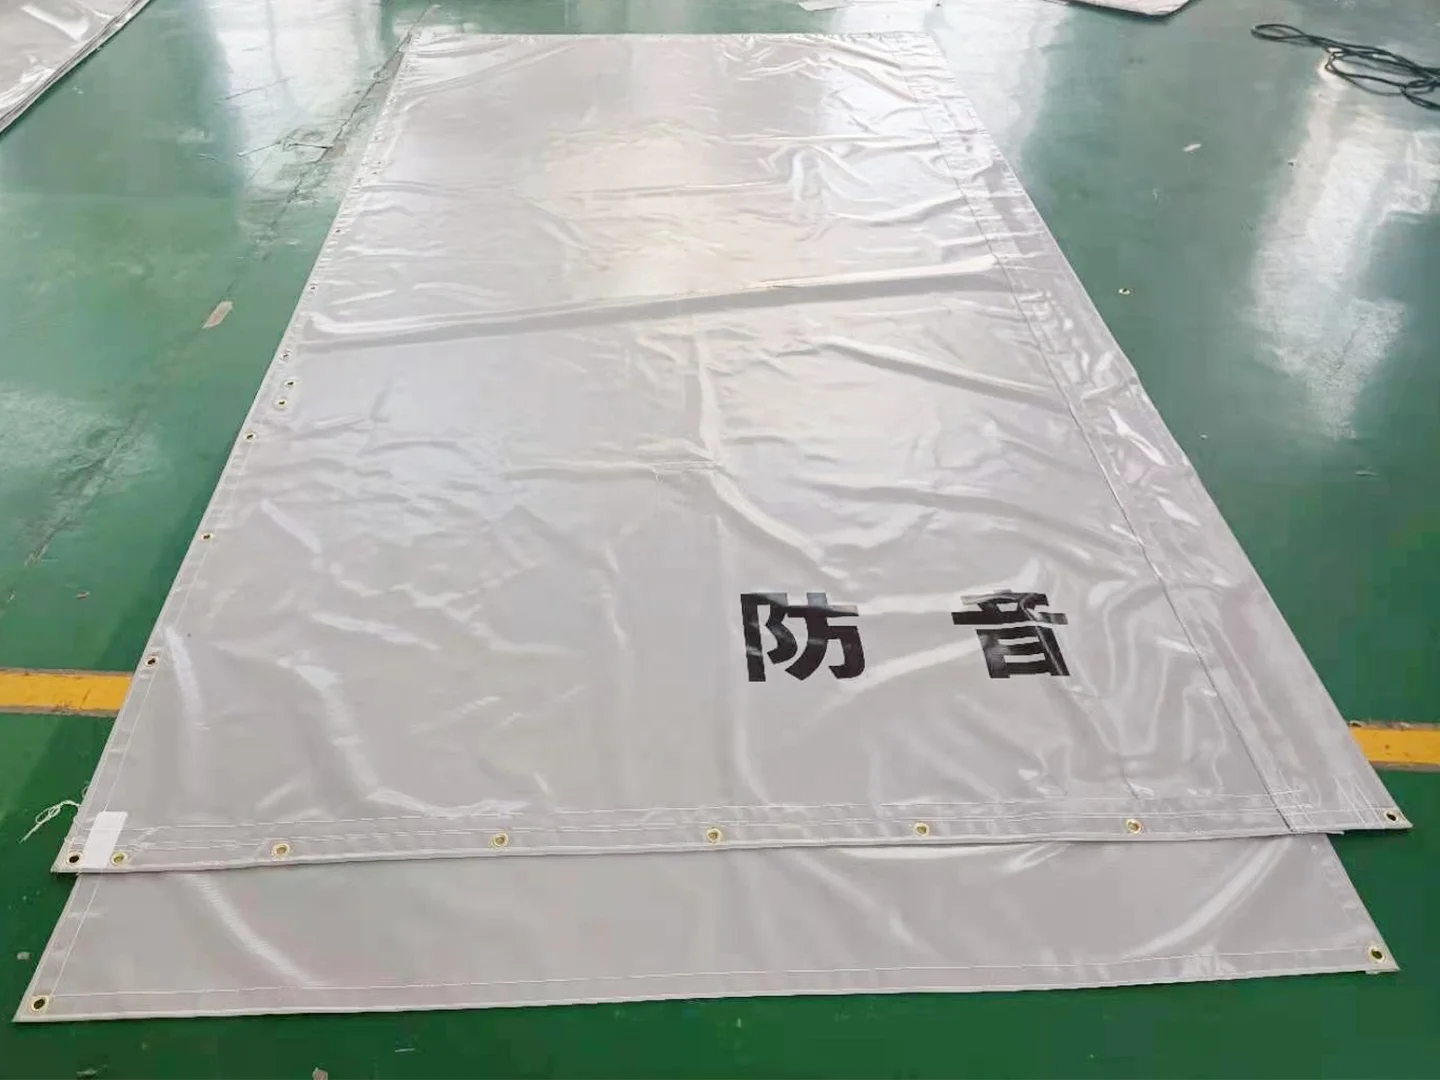 Acoustical noise barrier for soundproof and acoustical fencing and scaffolding sheet